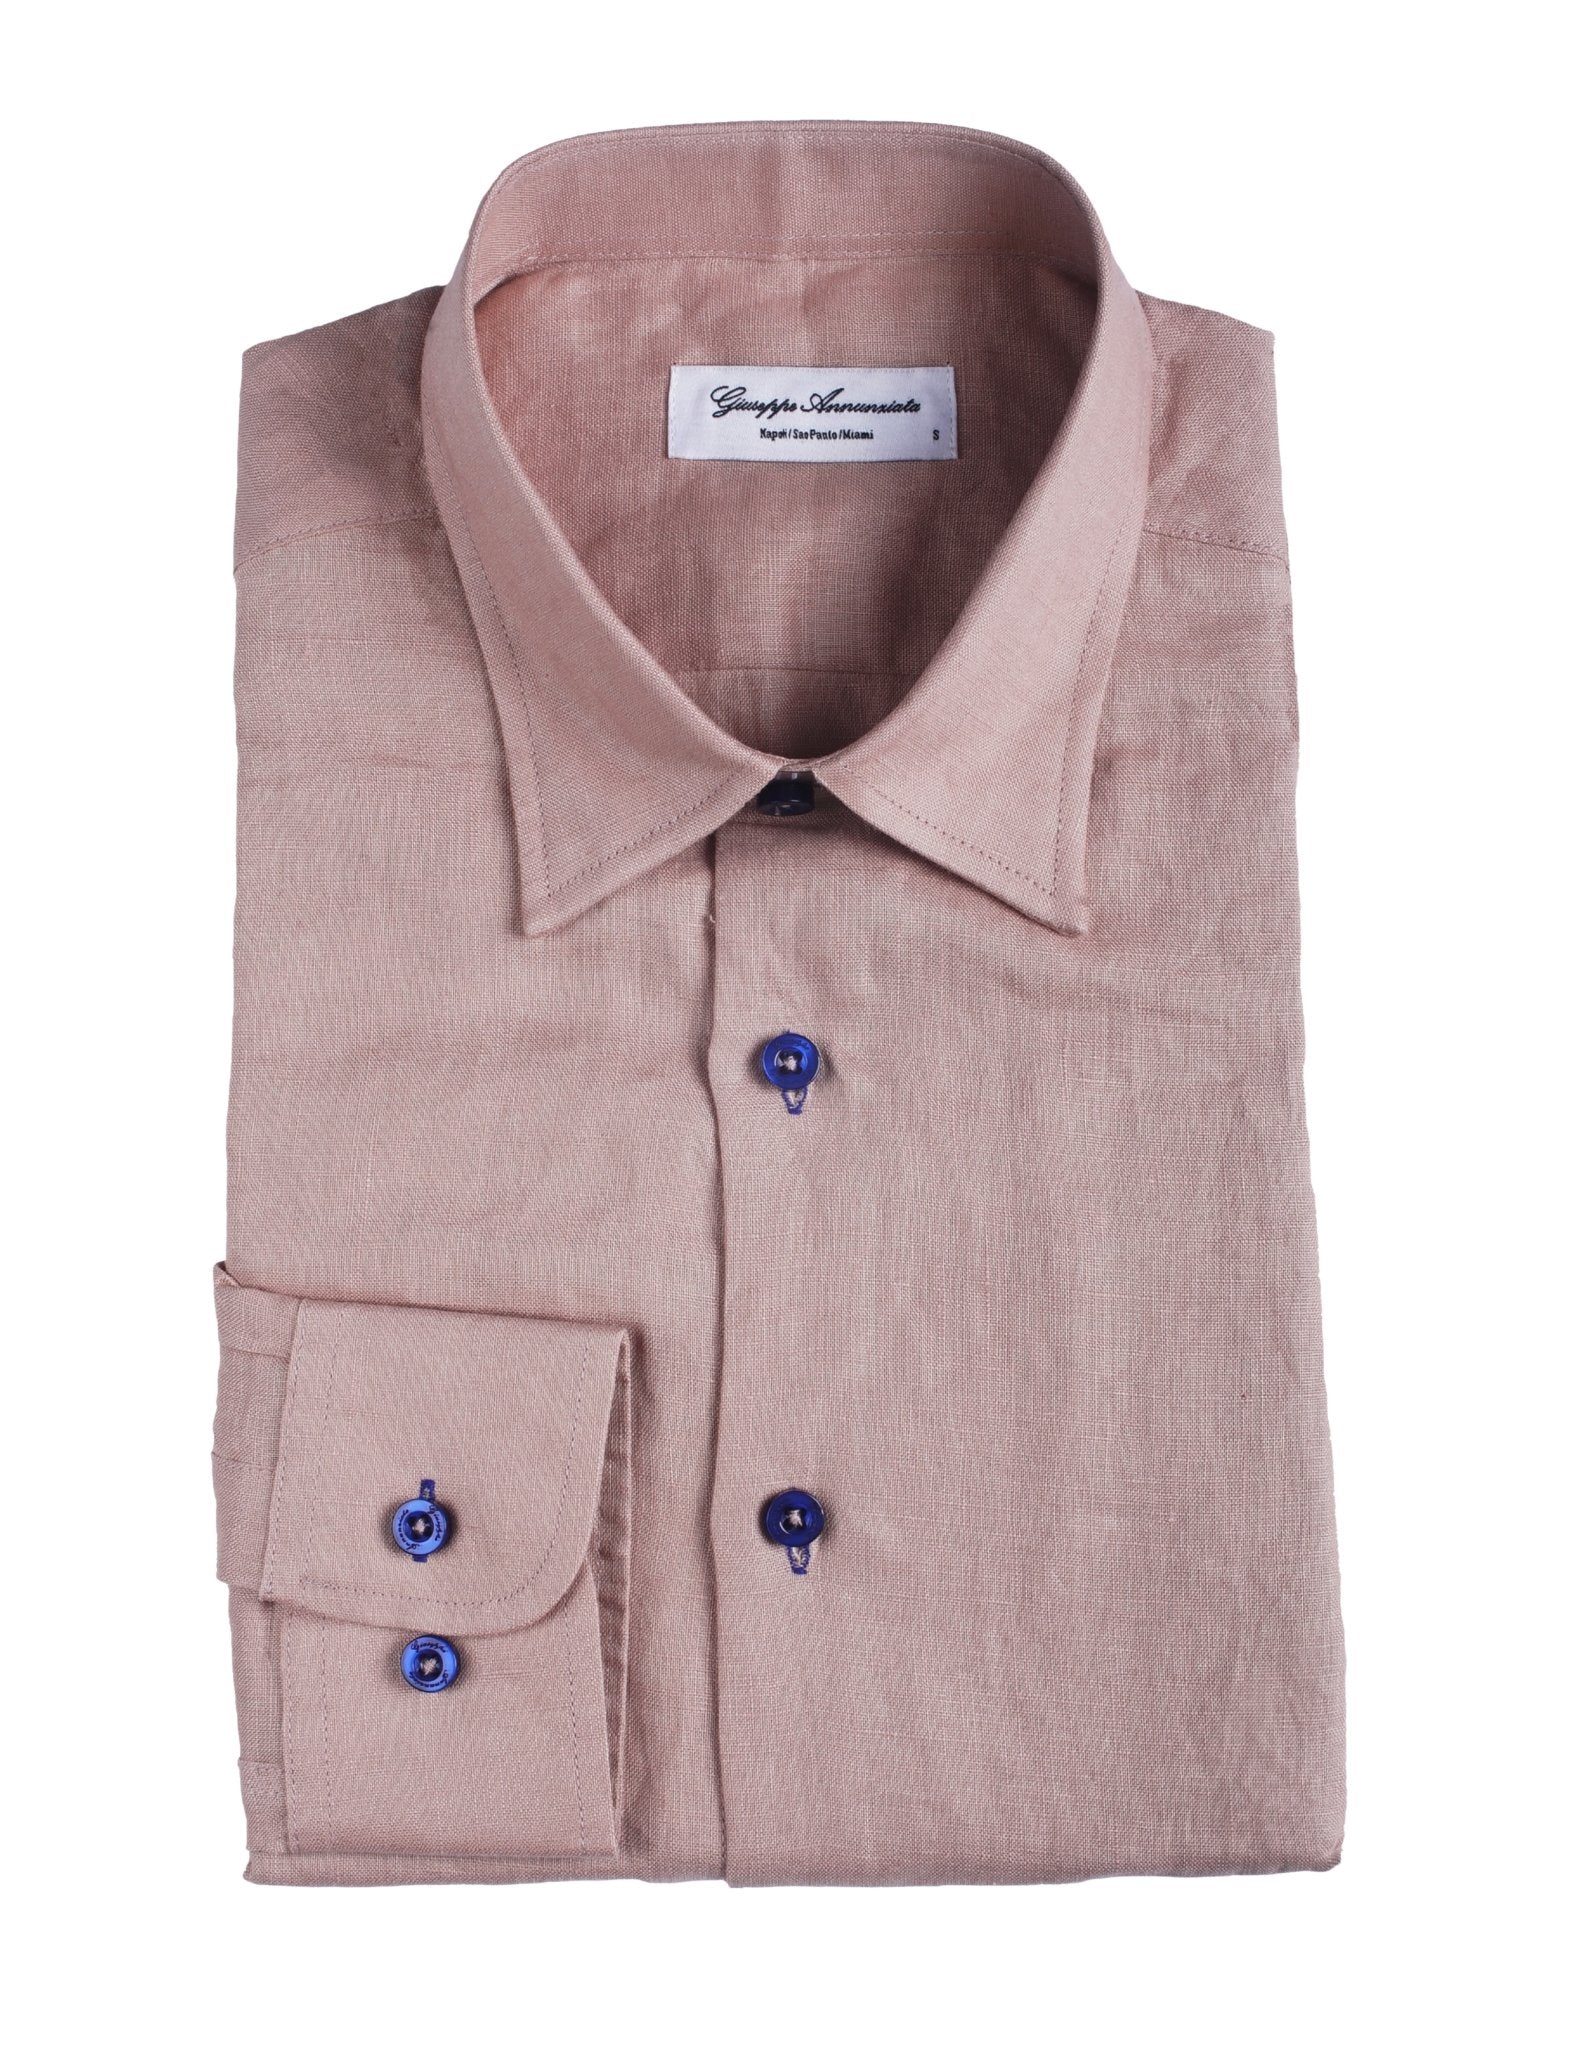 Pale Pink solid Color Pure linen shirt - Giuseppe Annunziata